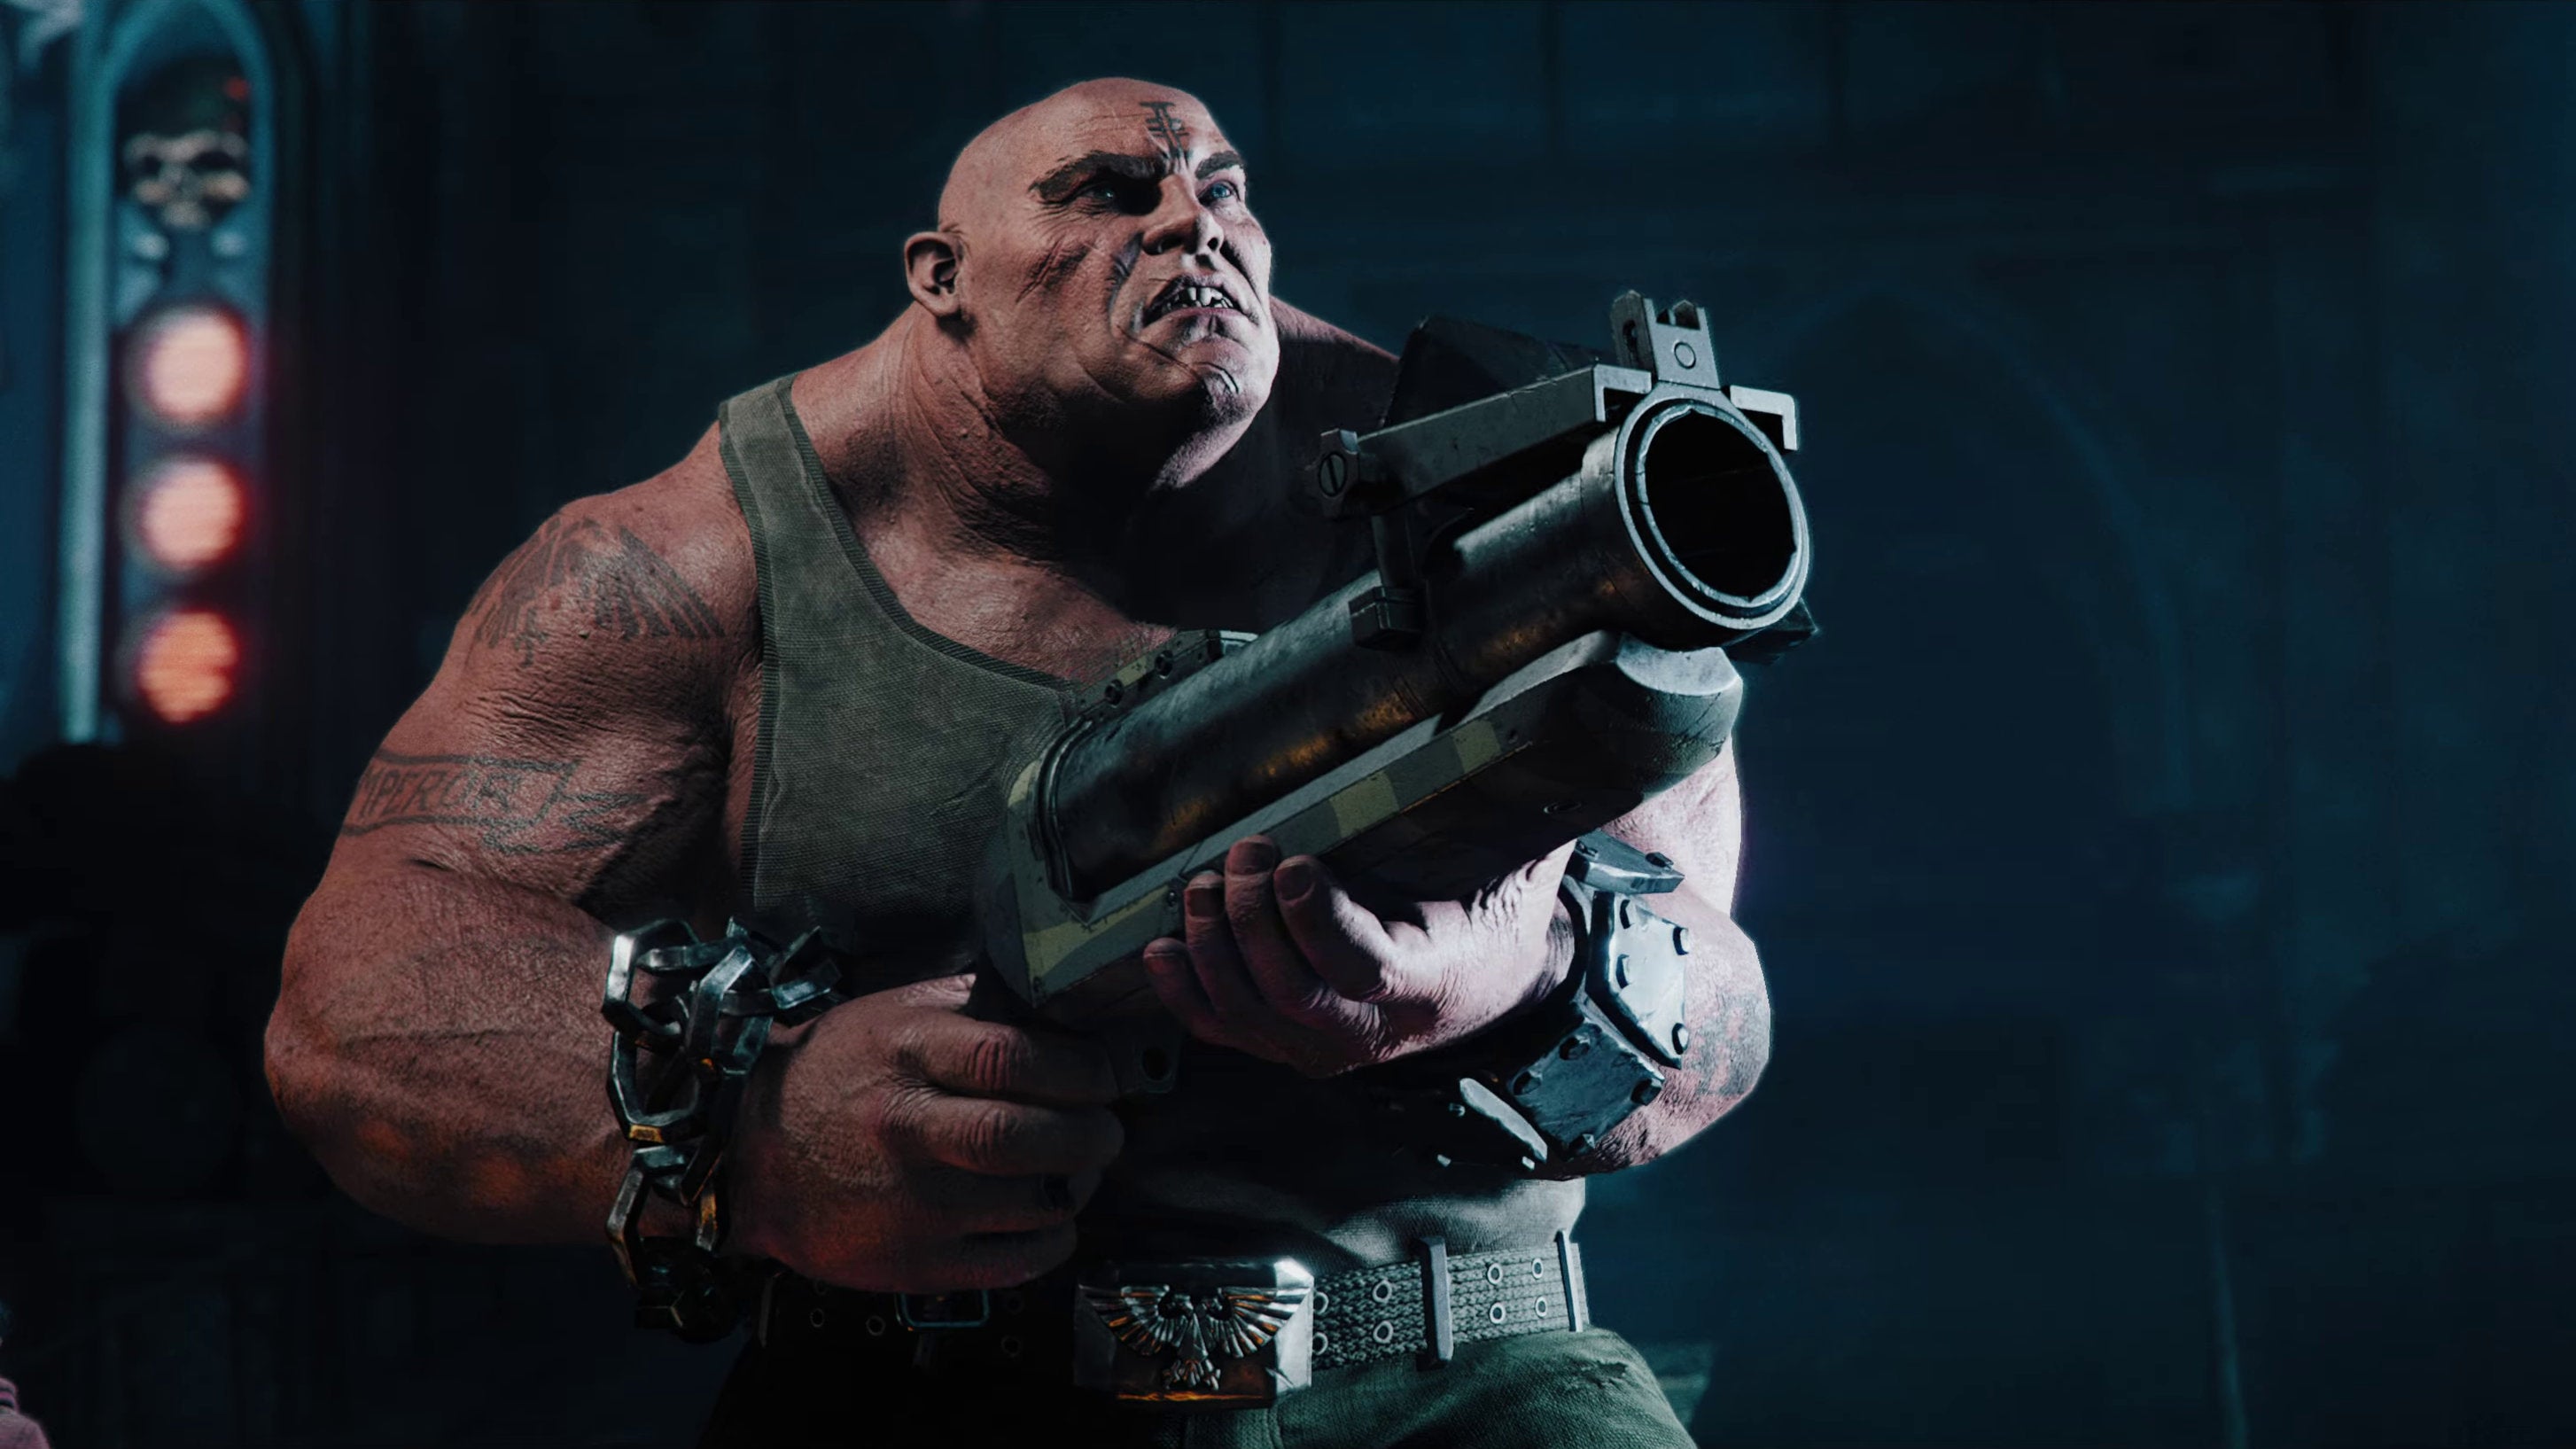 Image for Warhammer 40K: Darktide players are narked about the game’s monetisation